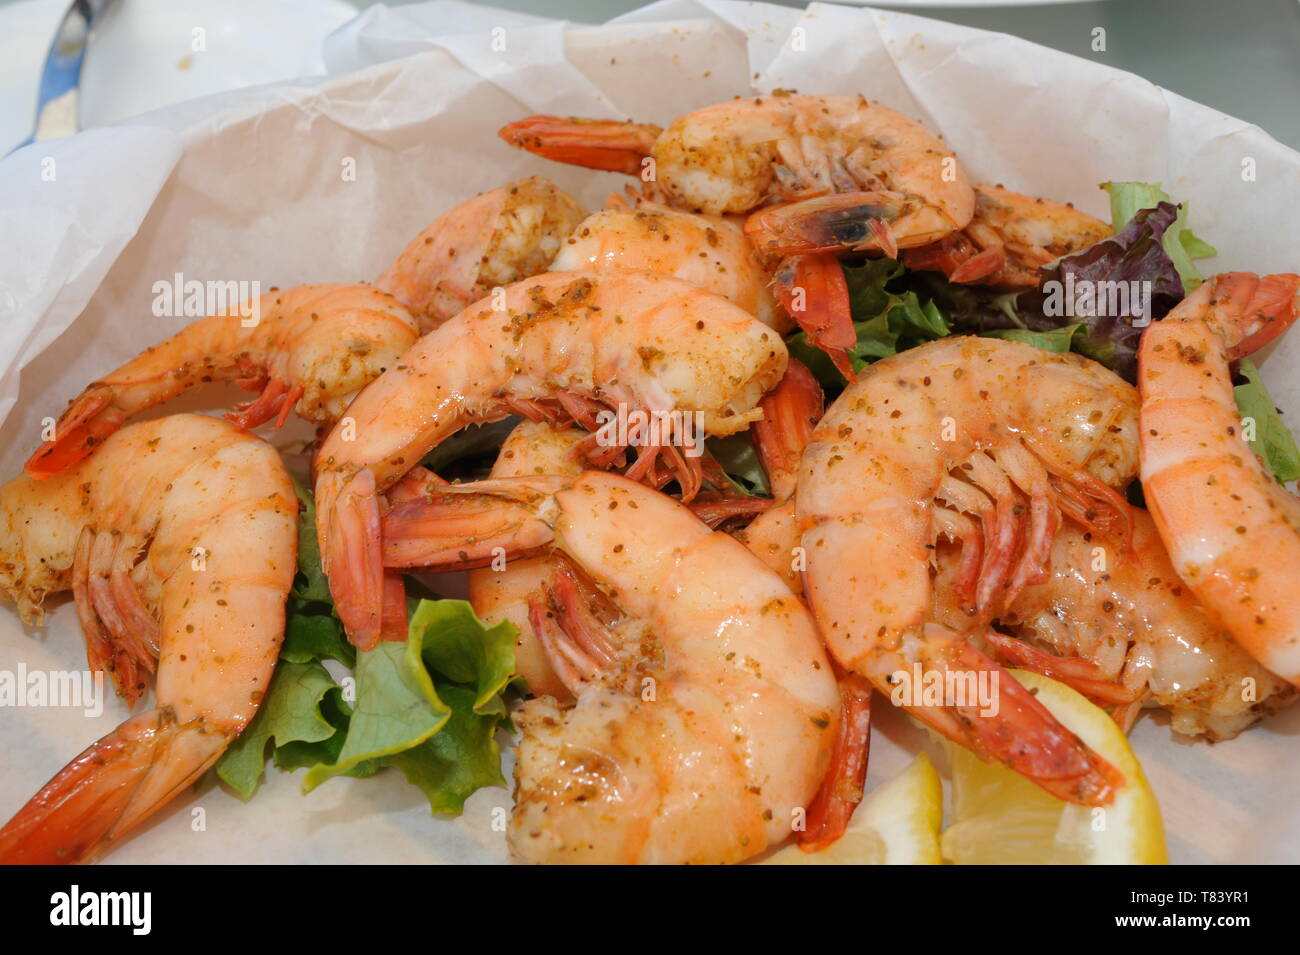 Close up of plate with delicious, mouthwatering, cooked, whole, fresh Key West Pink Shrimp with lemon slices, Key West, Florida, USA Stock Photo